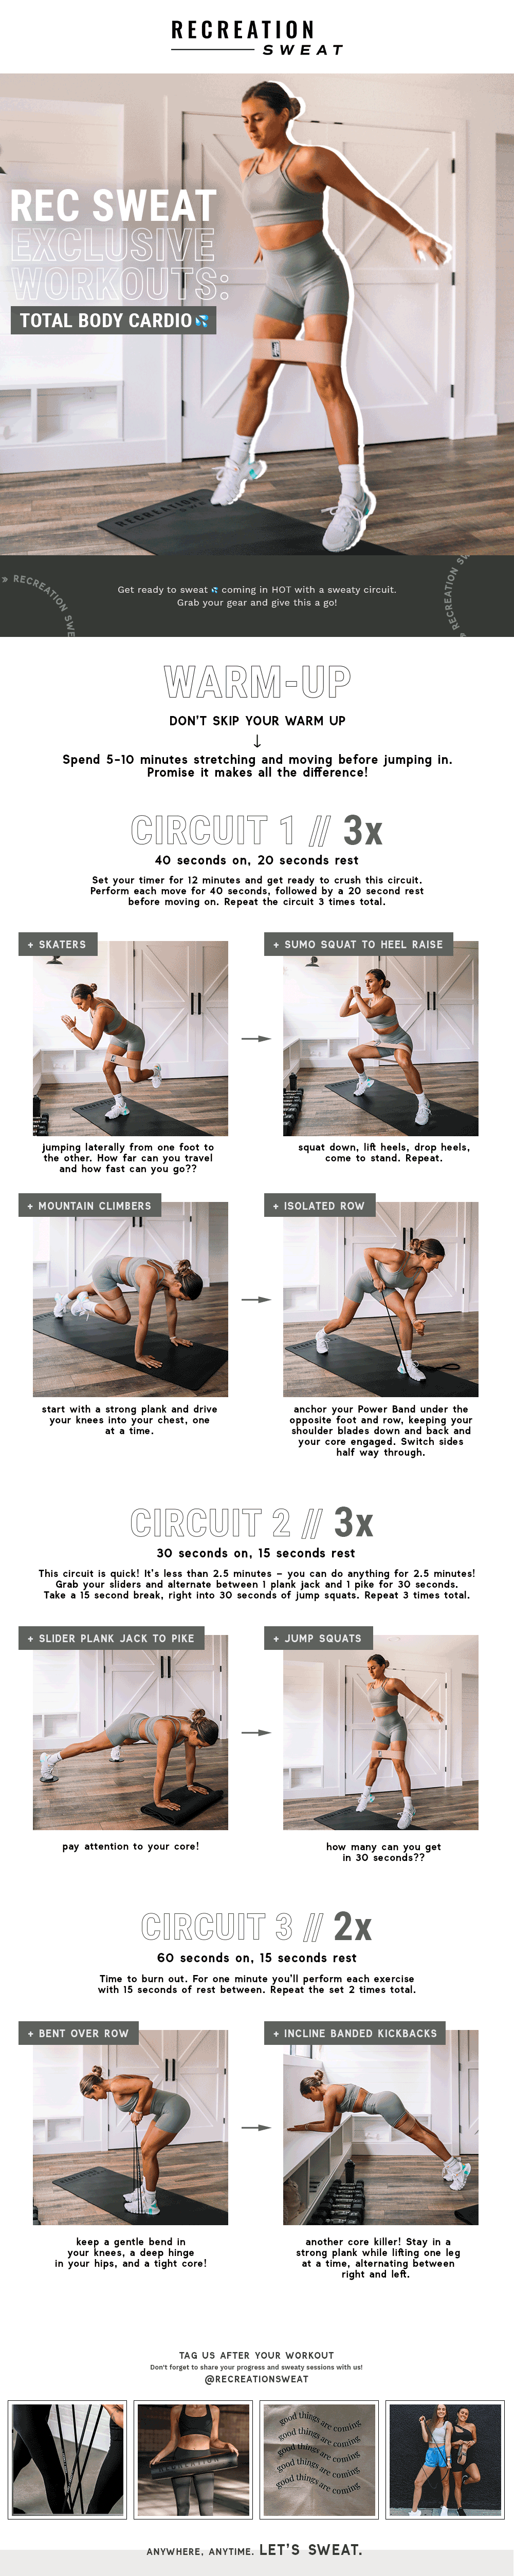 1.5.22_Exclusive-Workouts_01